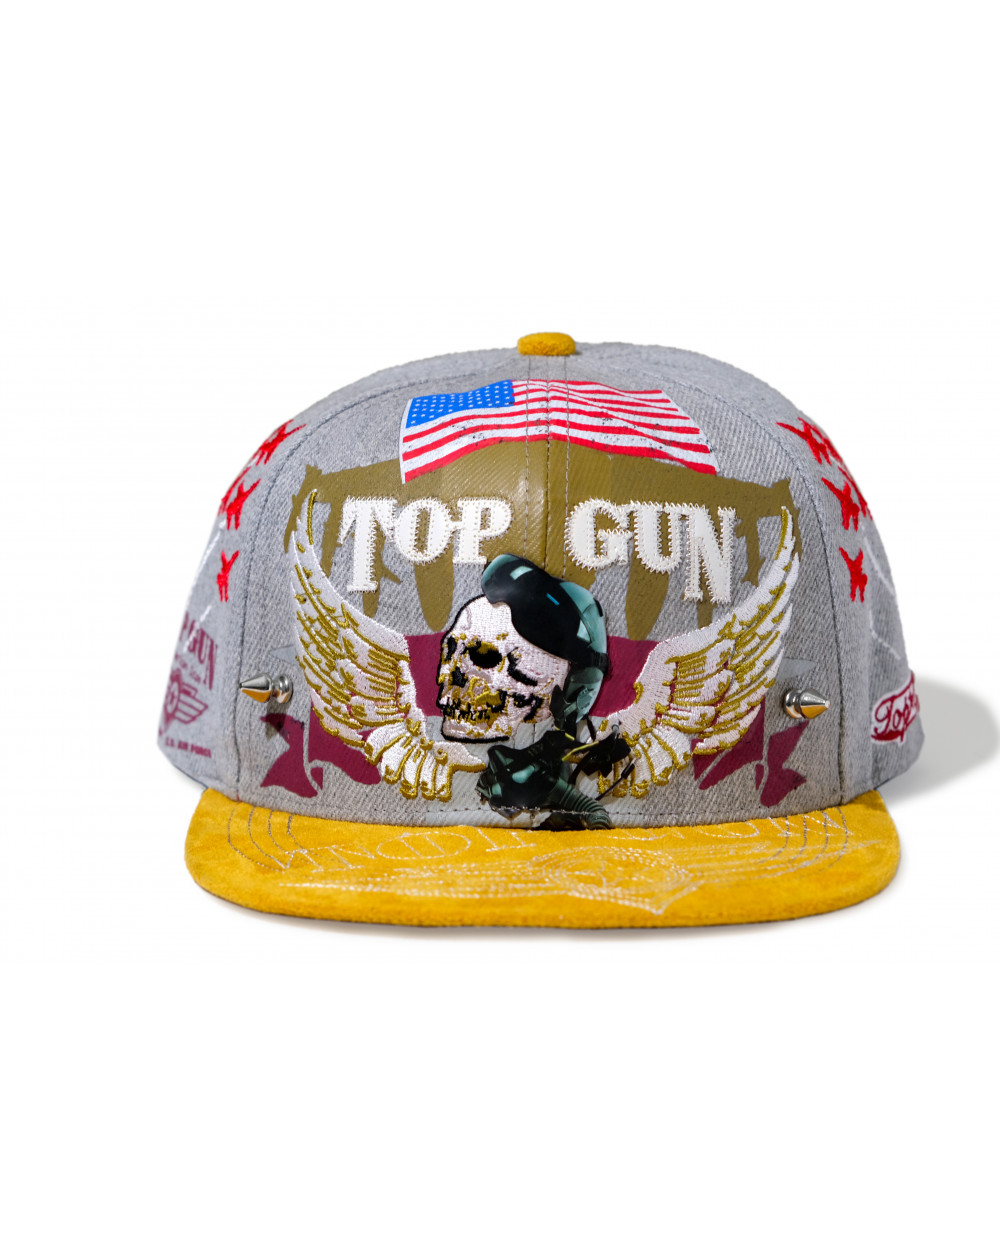 TOP GUN® EXCLUSIVE - Grey Snap / Limited & Numbered Edition